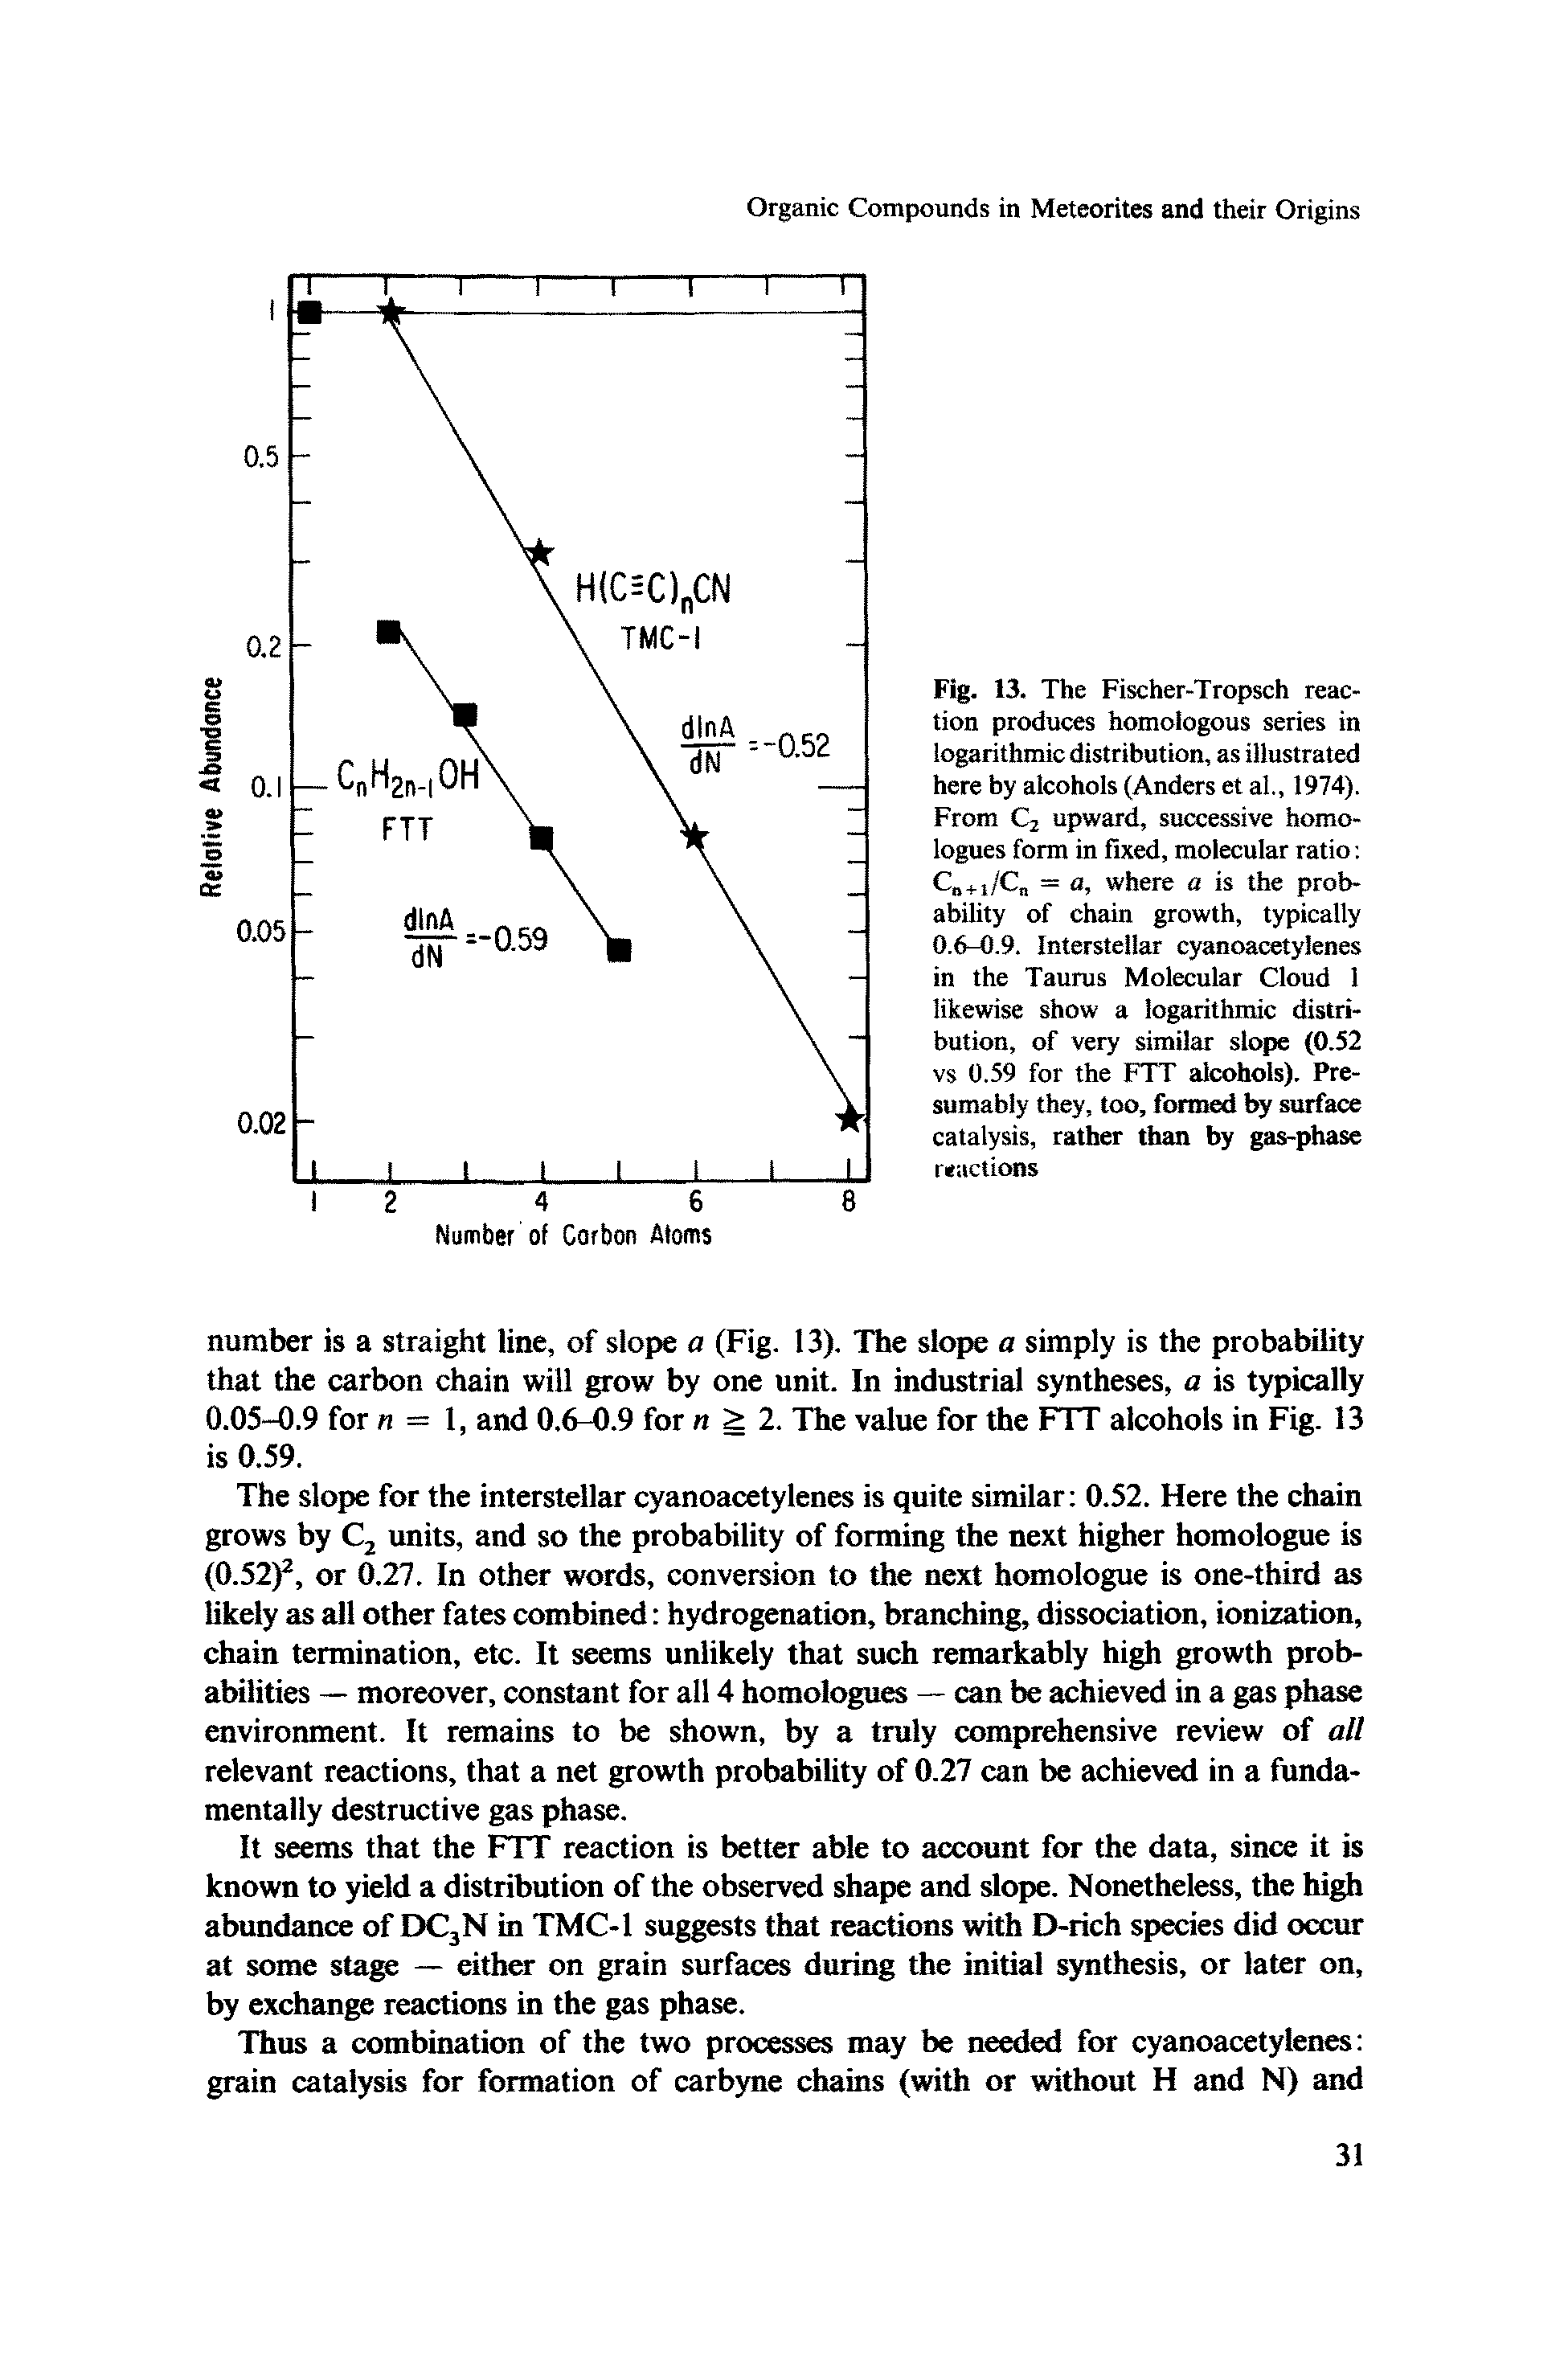 Fig. 13. The Fischer-Tropsch reaction produces homologous series in logarithmic distribution, as illustrated here by alcohols (Anders et al, 1974). From C2 upward, successive homo-logues form in fixed, molecular ratio C +t/C = a, where a is the probability of chain growth, typically 0.6-0.9. Interstellar cyanoacetylenes in the Taurus Molecular Cloud 1 likewise show a logarithmic distribution, of very similar slope (0.52 vs 0.59 for the FTT alcohols). Presumably they, too, formed by surface catalysis, rather than by gas-phase reactions...